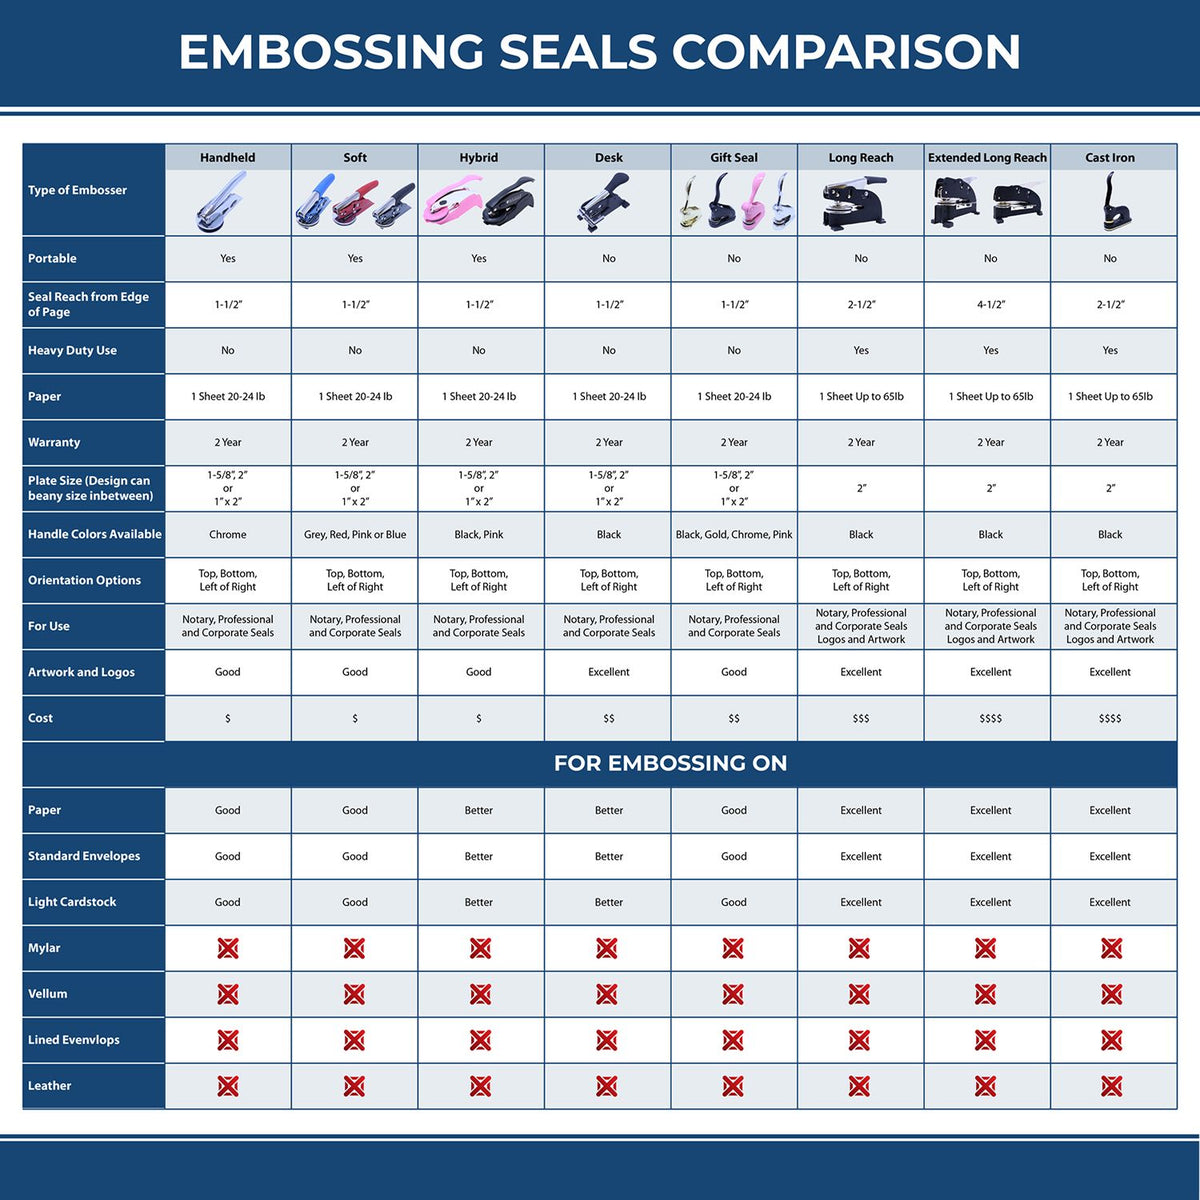 A comparison chart for the different types of mount models available for the Oklahoma Engineer Desk Seal.